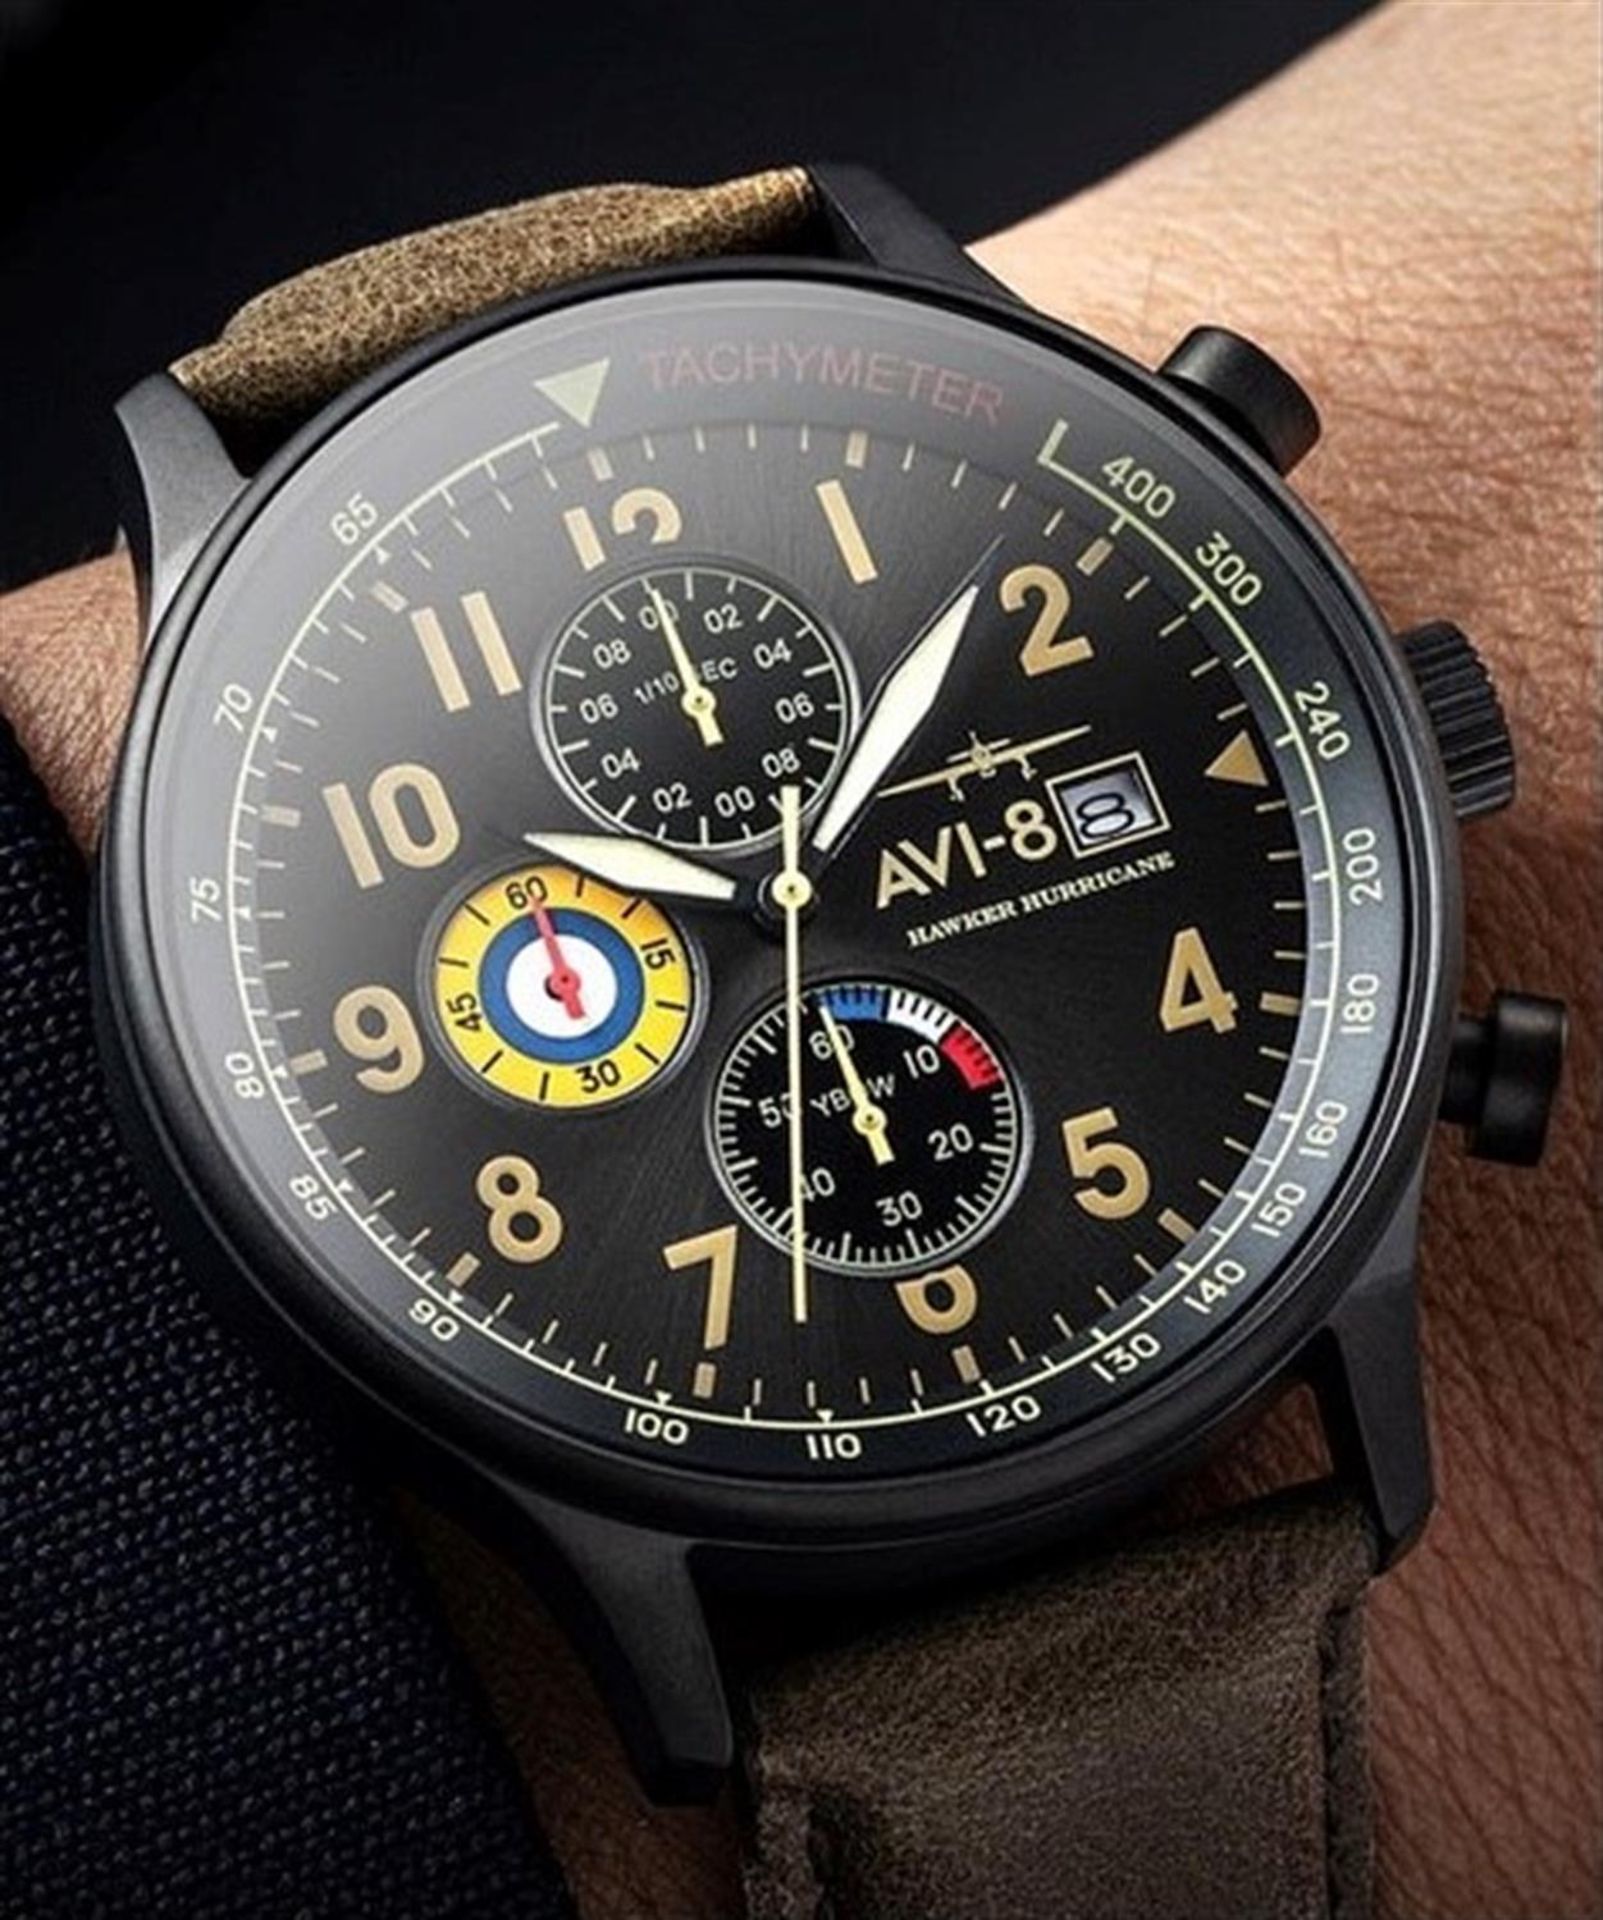 Classic Chronograph, an Homage to the Hawker Hurricane - Image 2 of 4